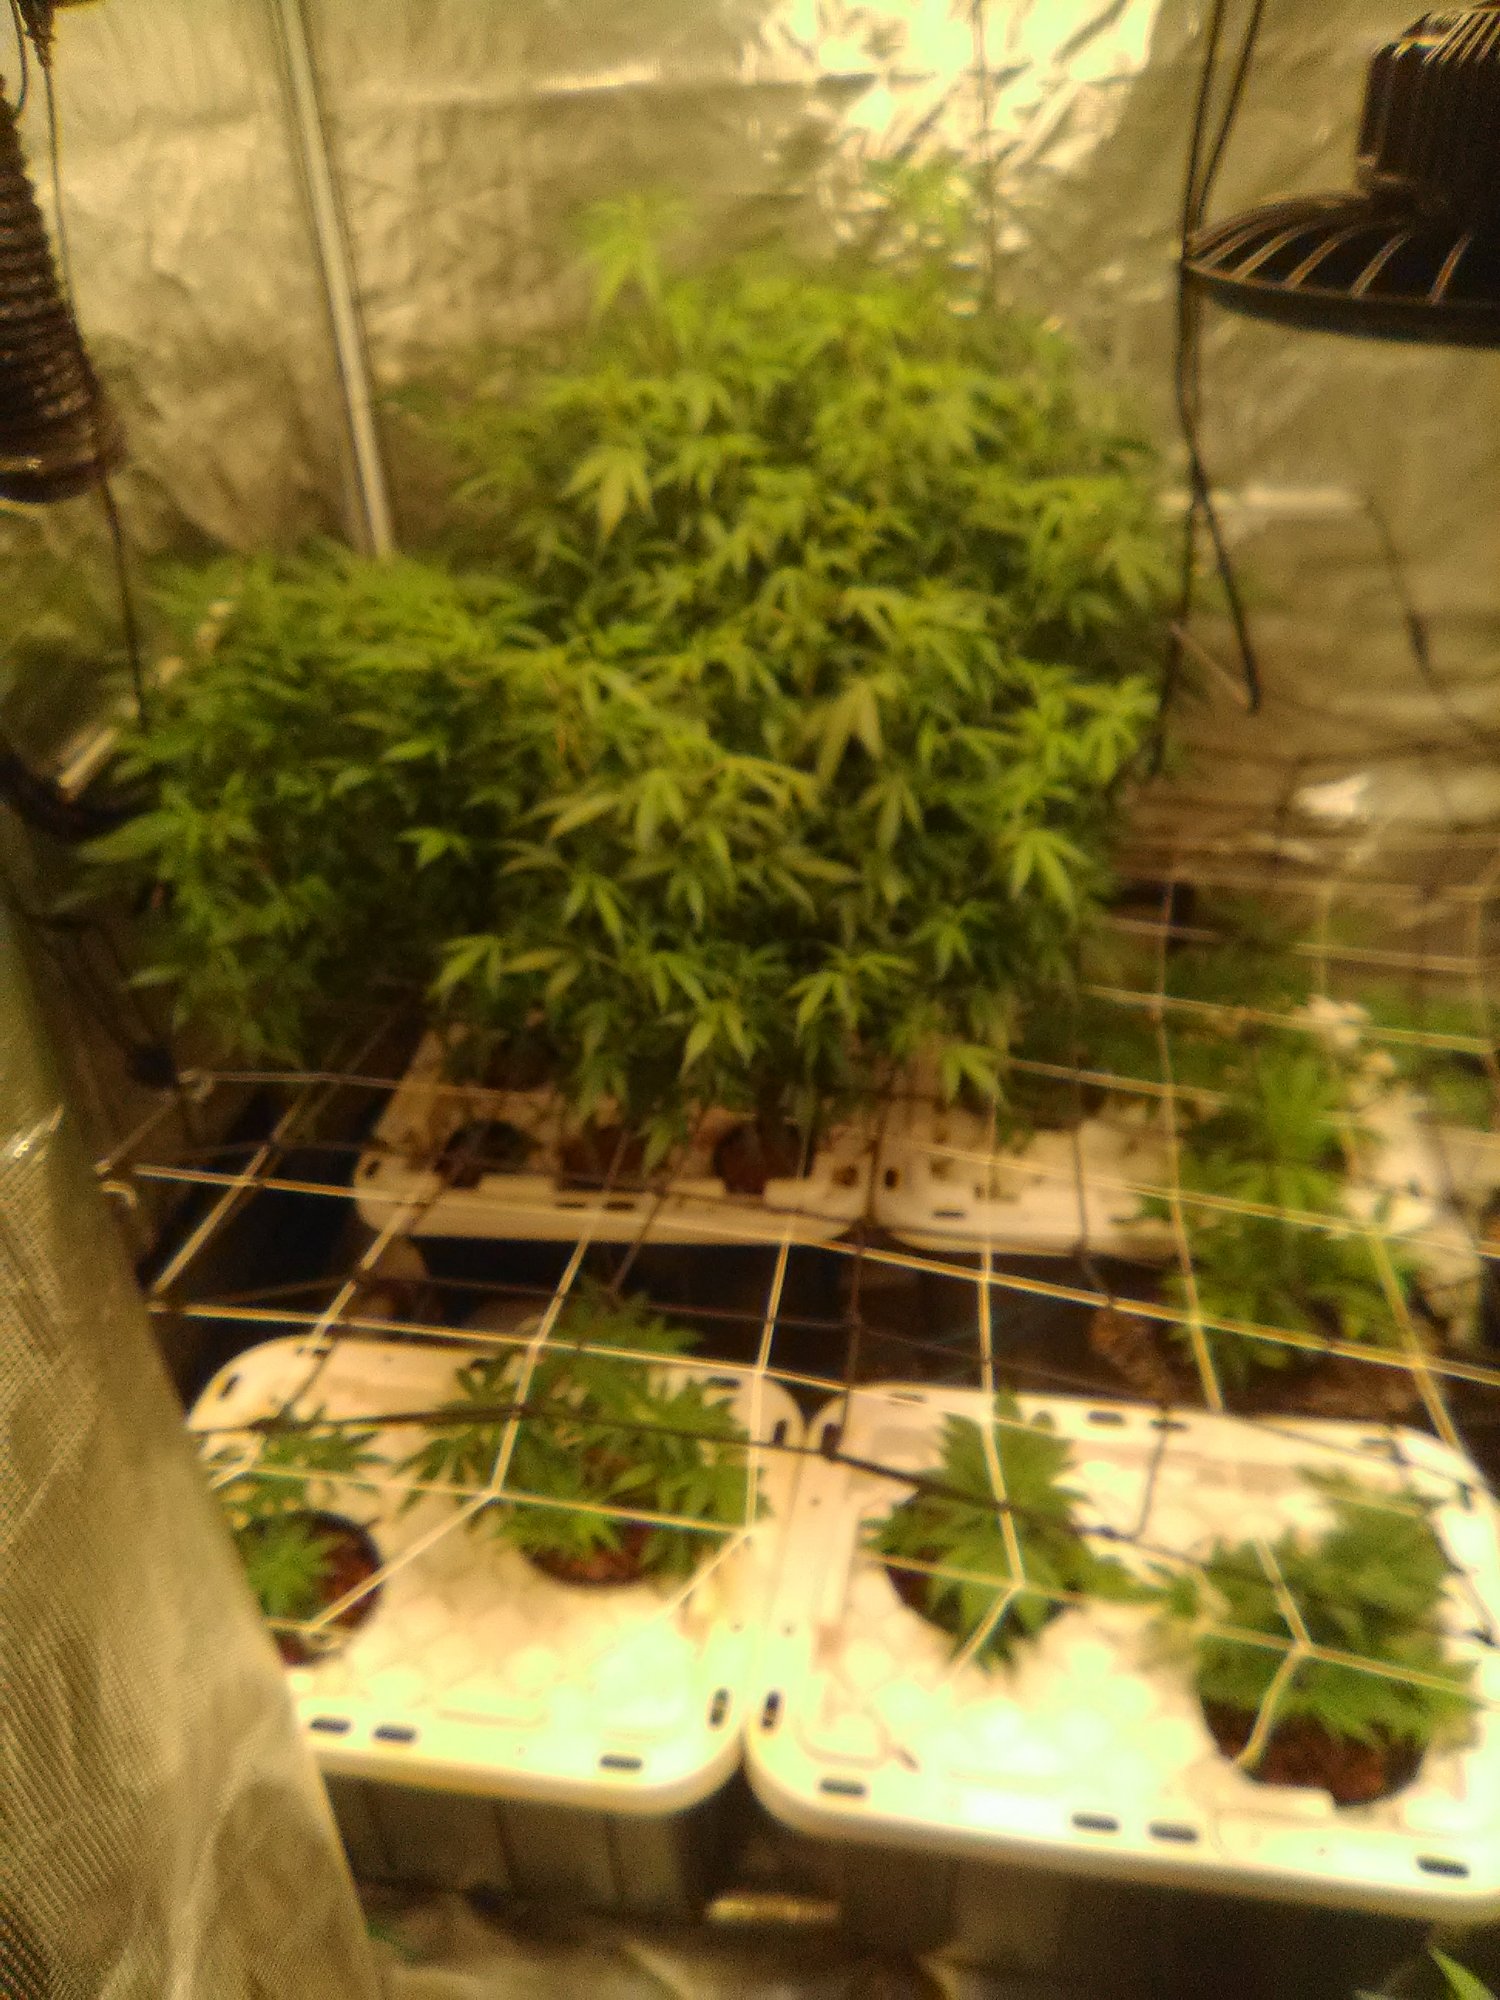 First time dwc run with auto flower clones and feminized bruce banner and lemon kush 2